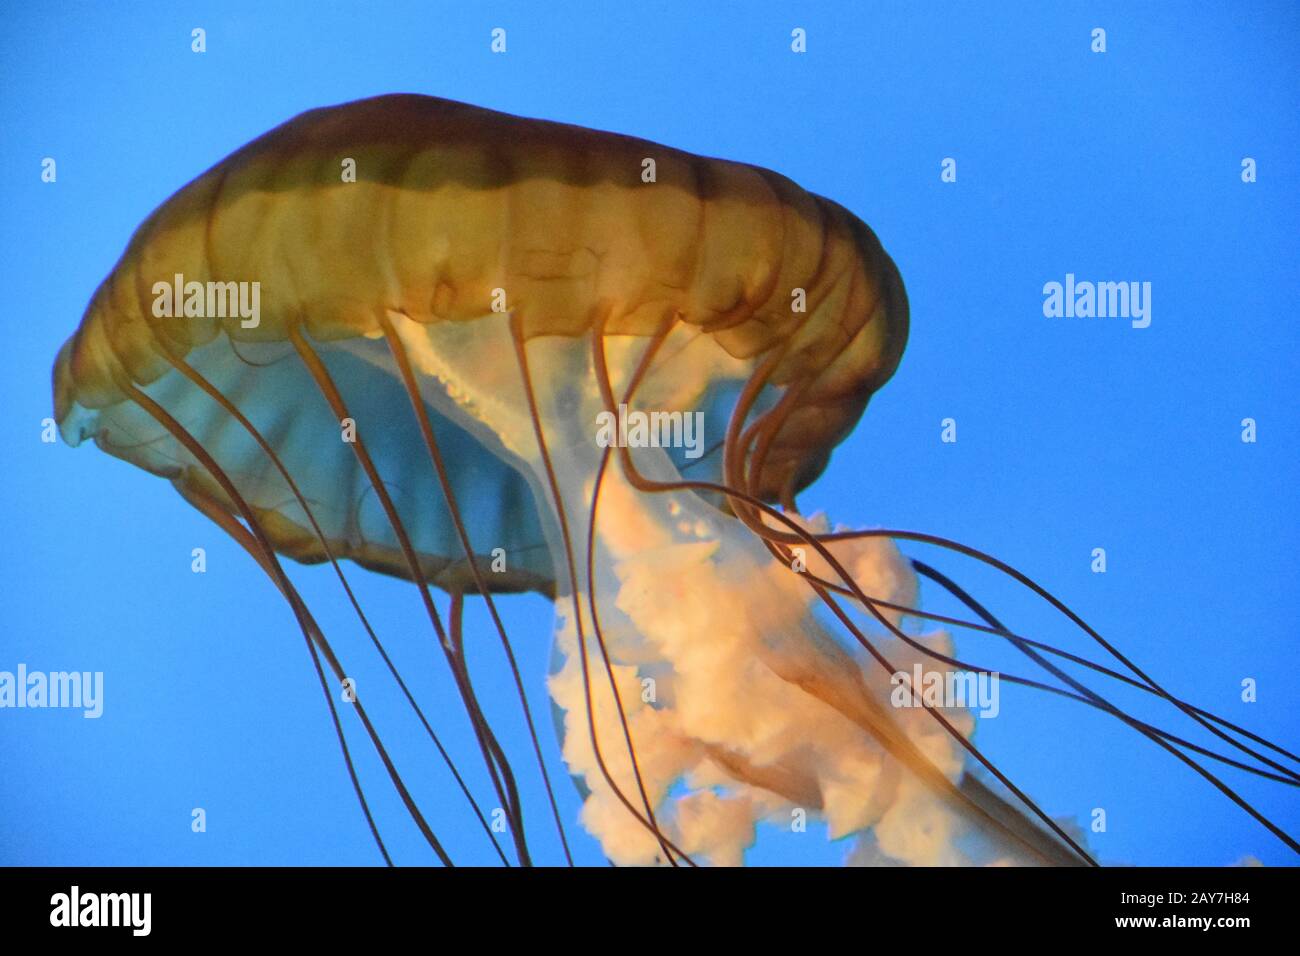 Pacific Sea Nettle Jellyfish Banque D'Images